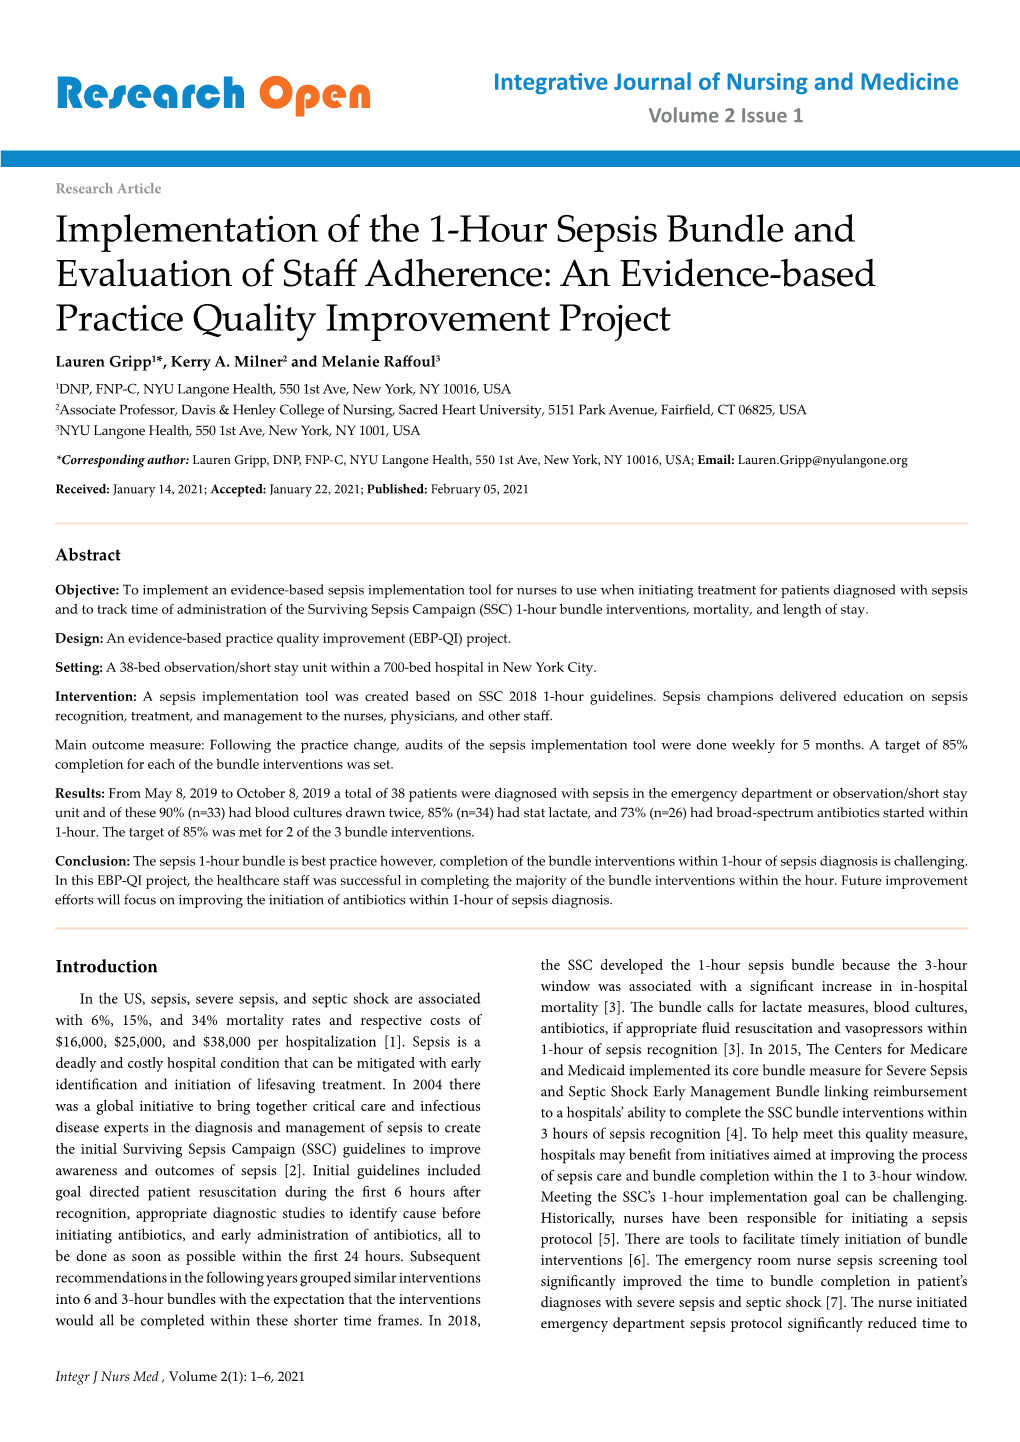 Implementation of the 1-Hour Sepsis Bundle and Evaluation of Staff Adherence: an Evidence-Based Practice Quality Improvement Project Lauren Gripp1*, Kerry A